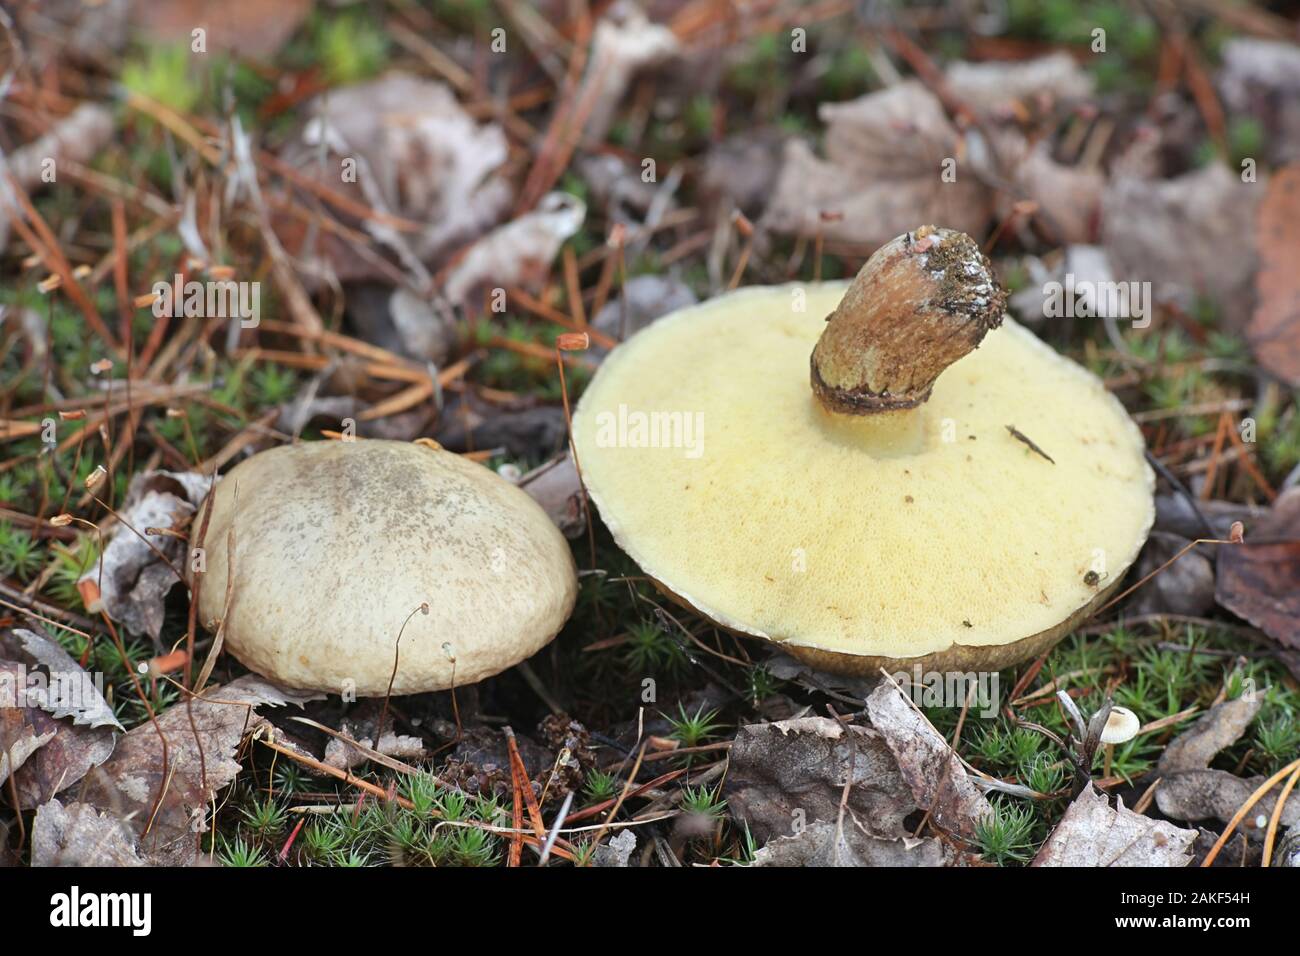 Suillus luteus, known as  slippery jack or sticky bun, edible mushrooms from Finland Stock Photo